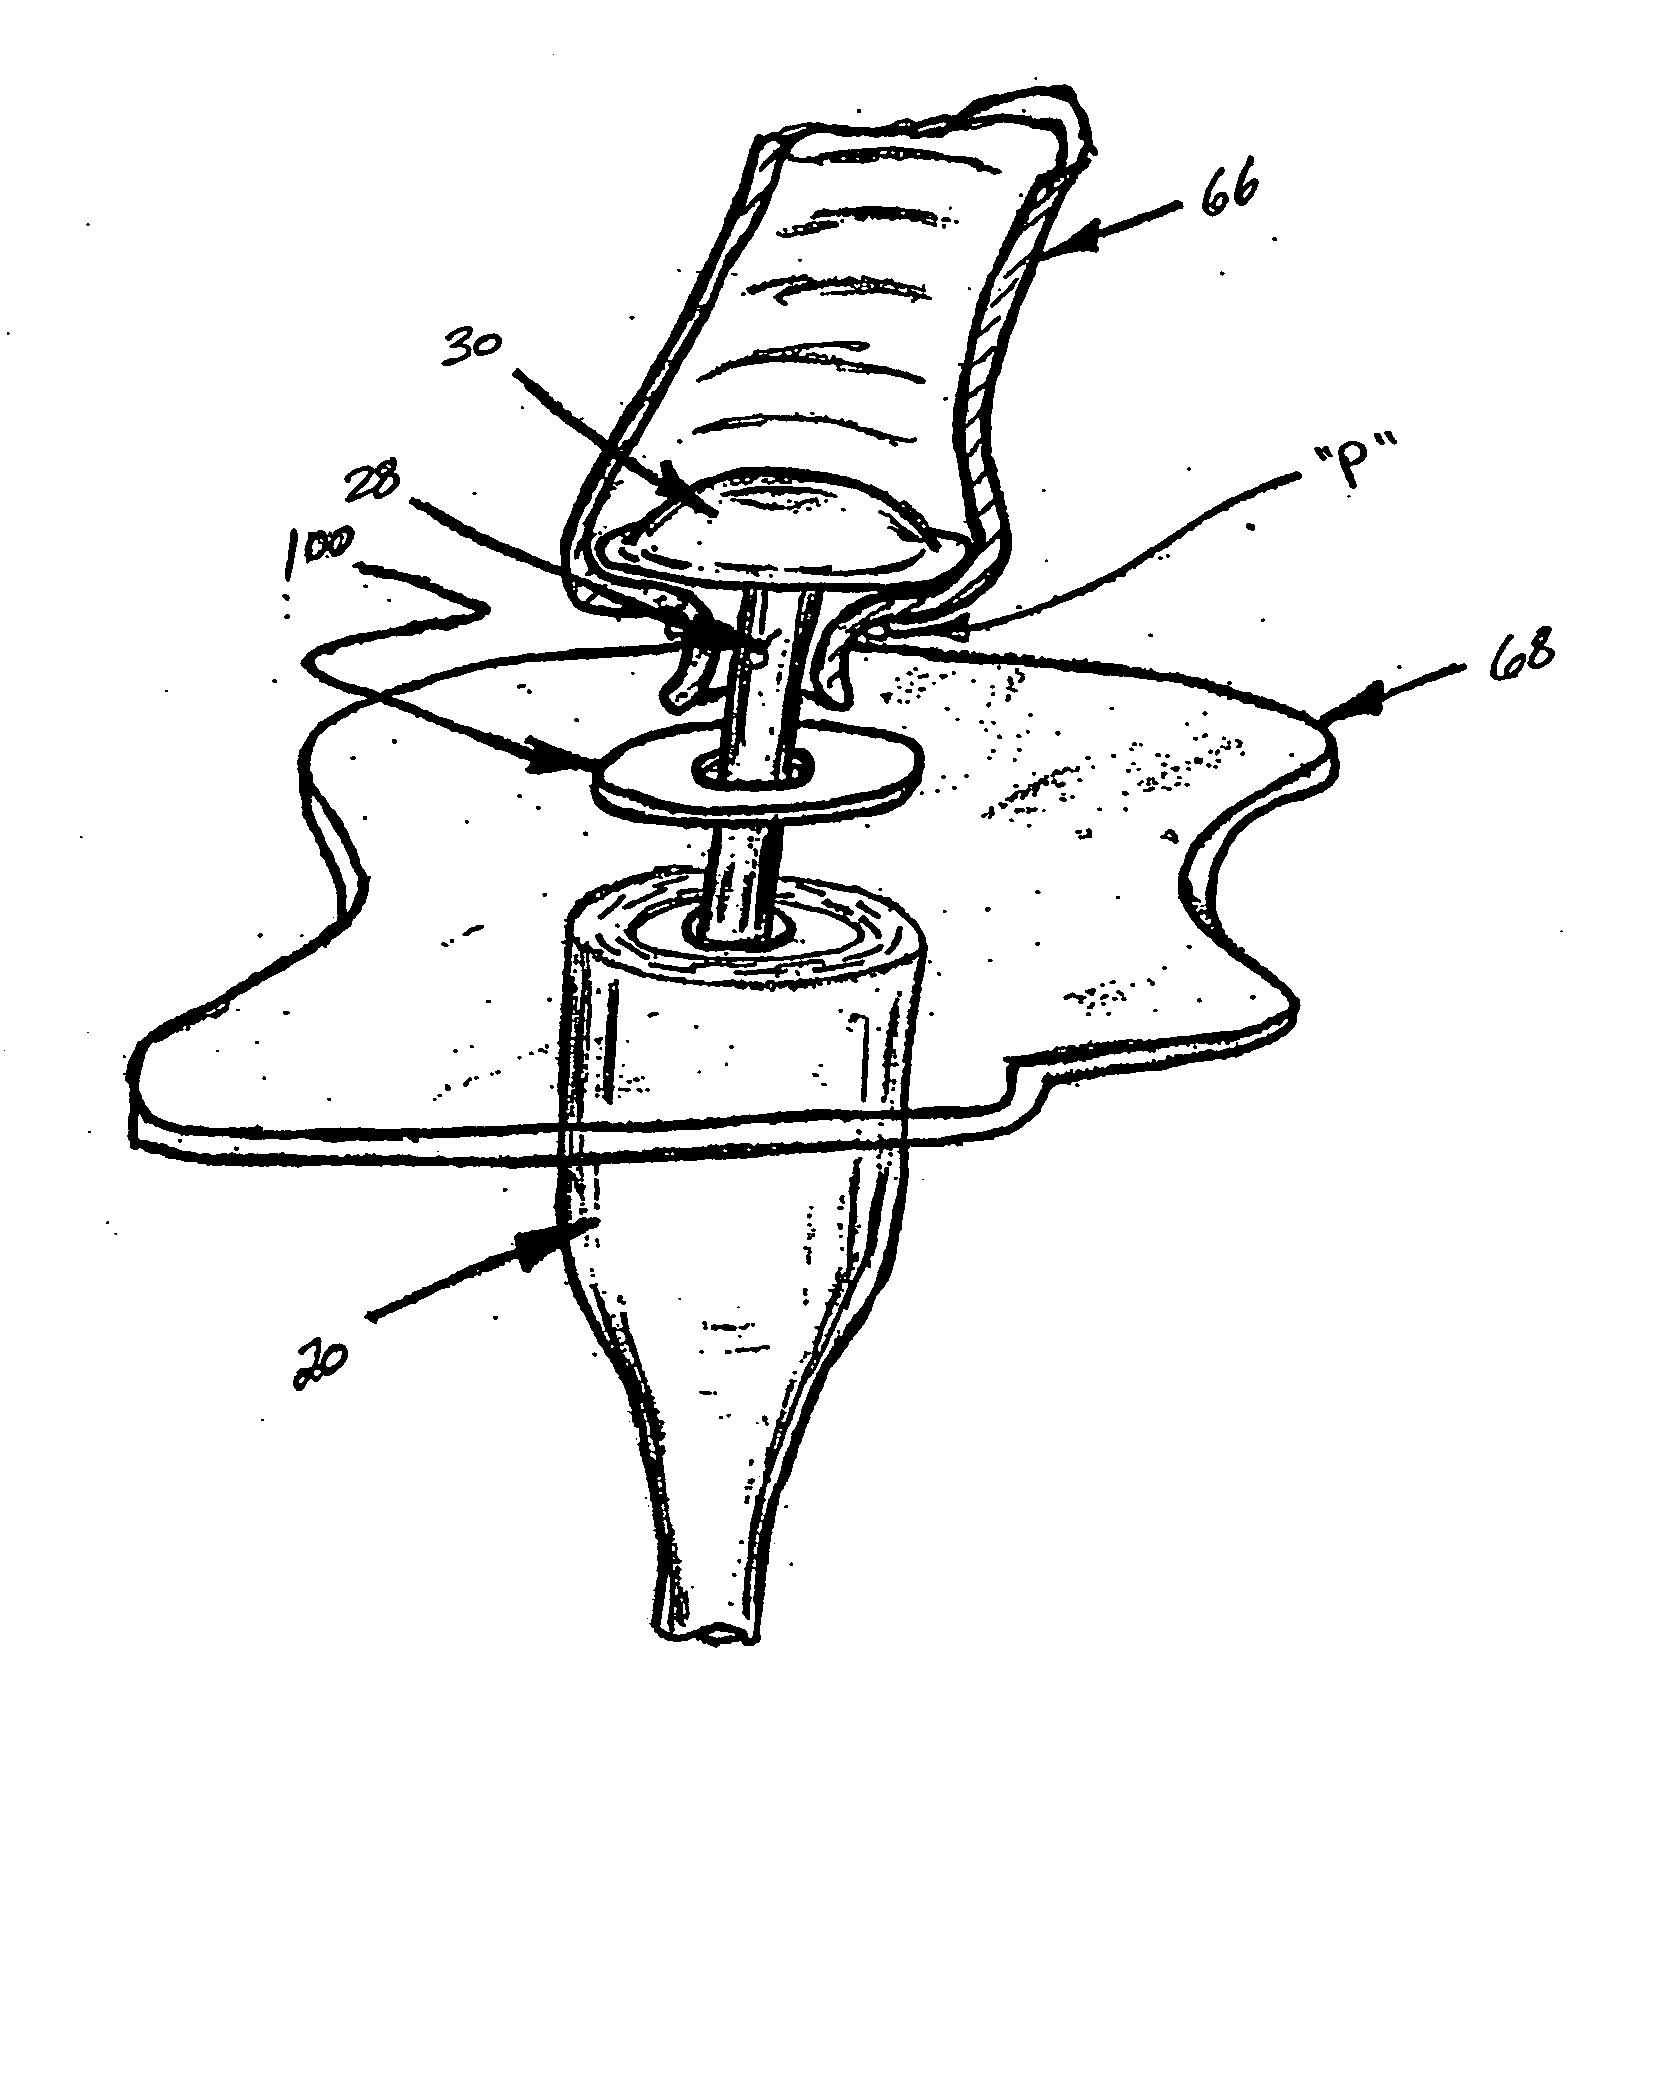 Annular disk for reduction of anastomotic tension and methods of using the same